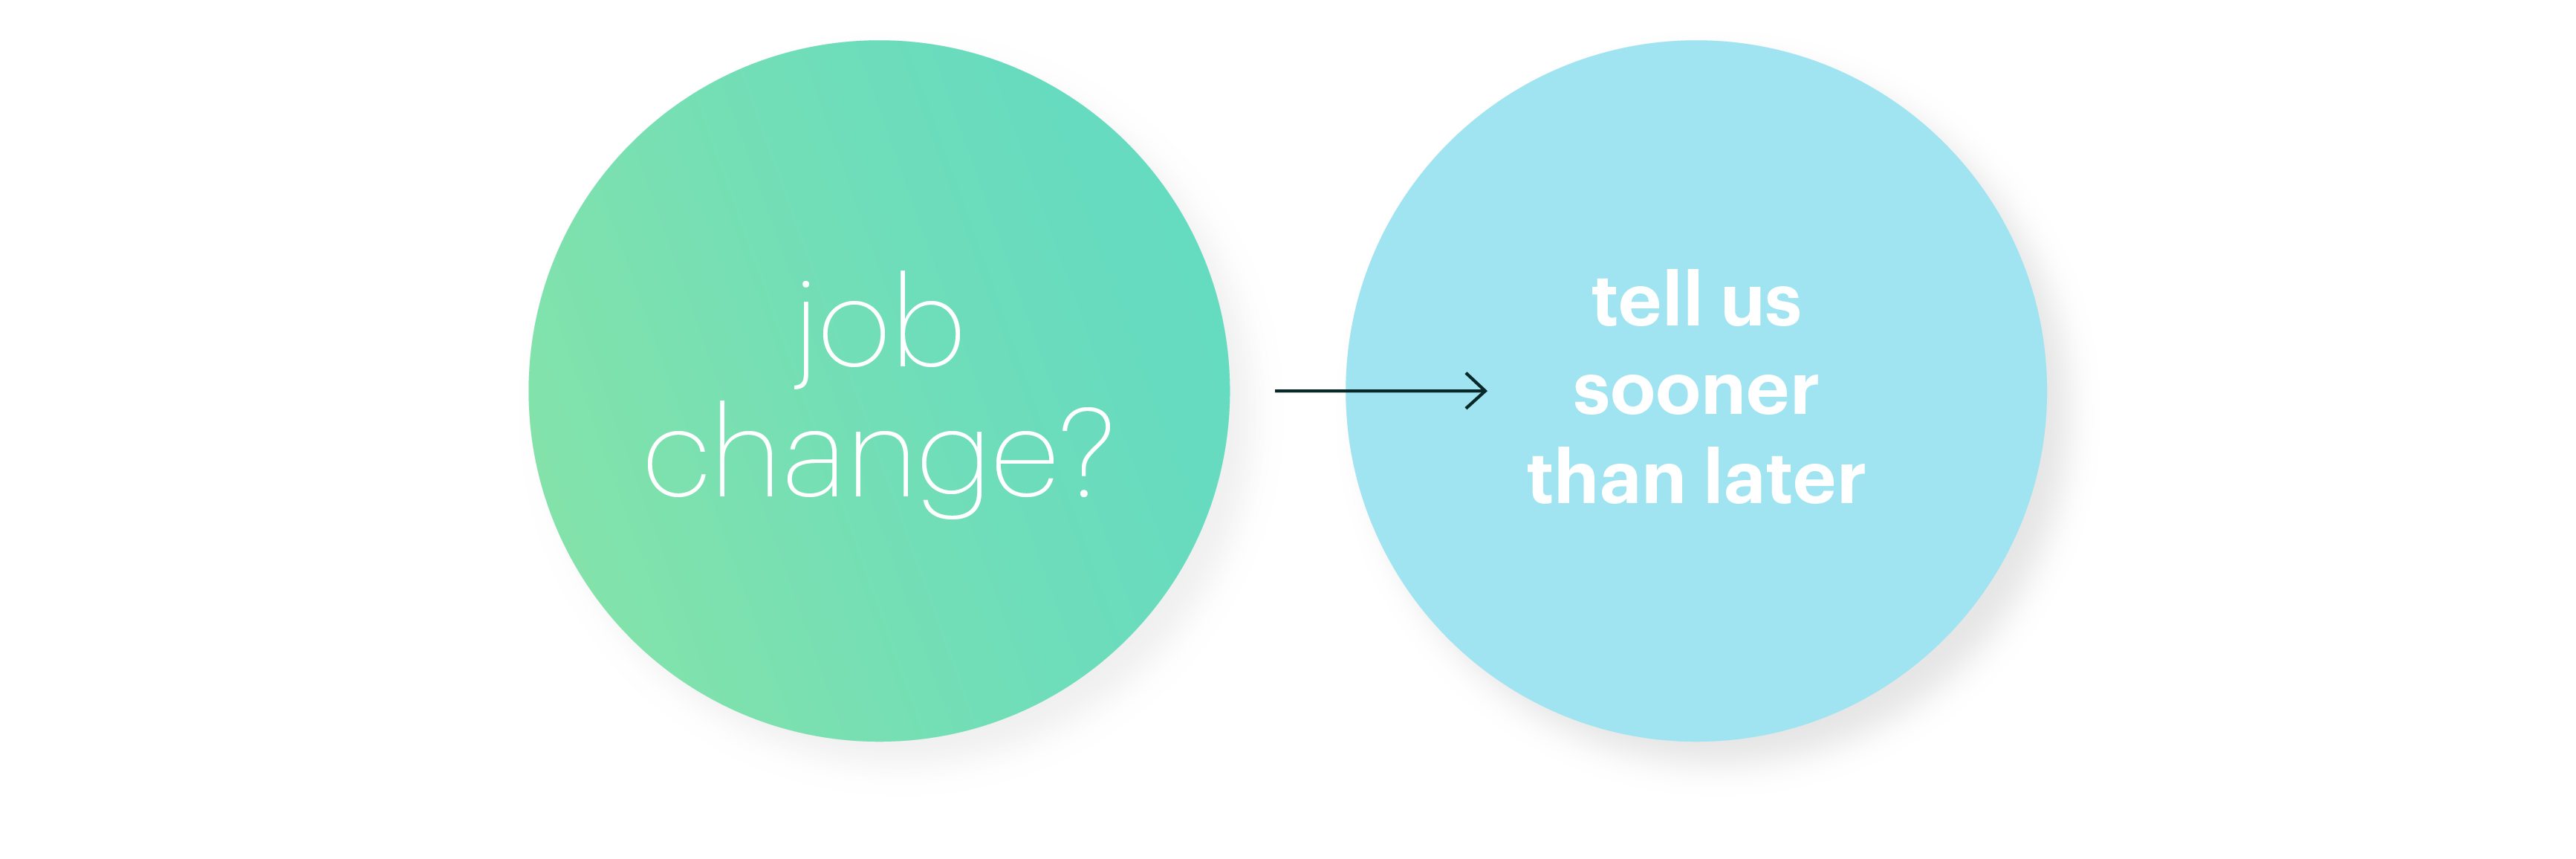  Diagram: Two Side by Side Circles. Left Circle: Job Change and Blue Circle: Tell Us Sooner or Later